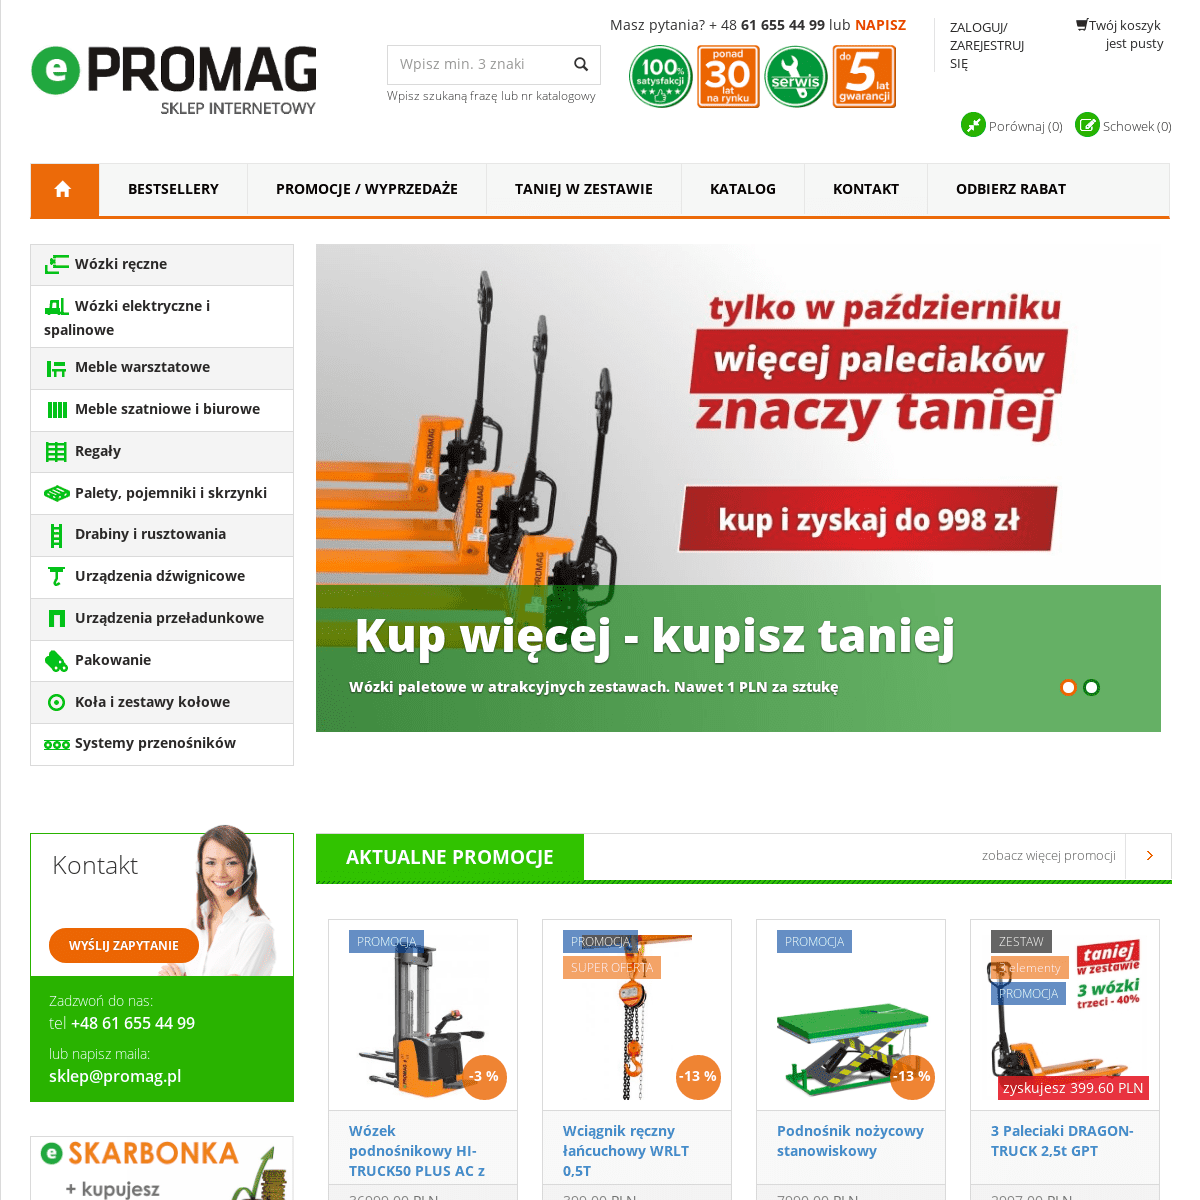 A complete backup of e-promag.pl